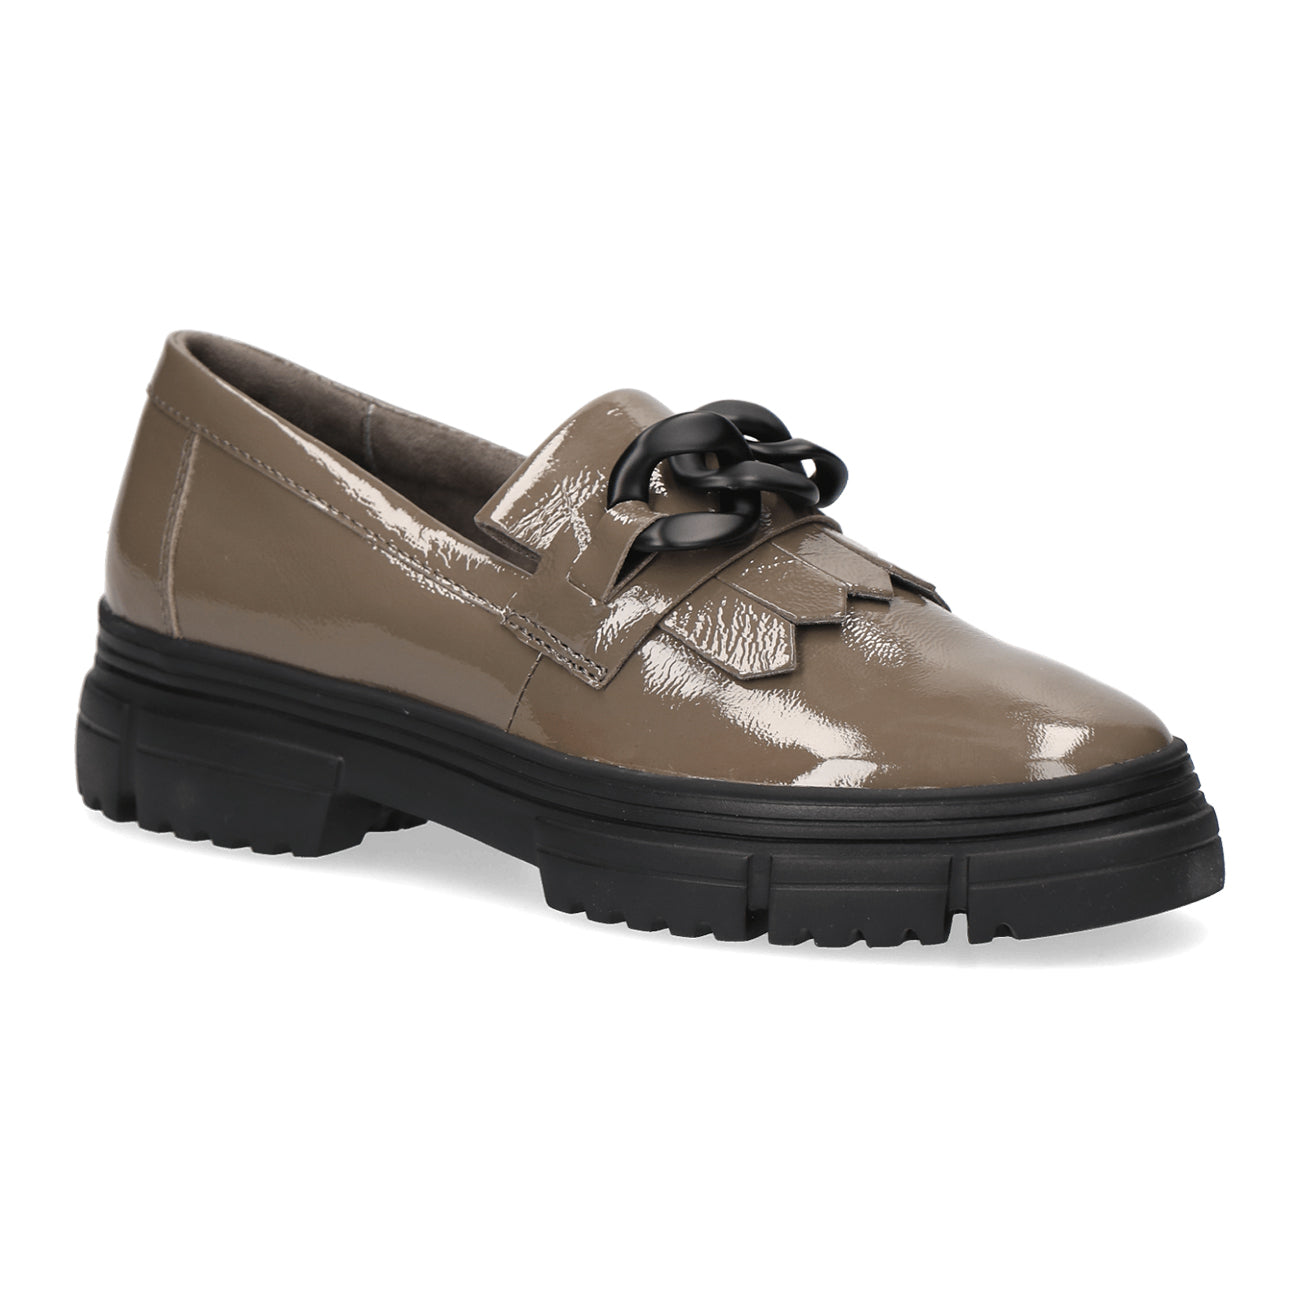 Caprice | Chunky Loafer 24701 | Mud Patent Leather